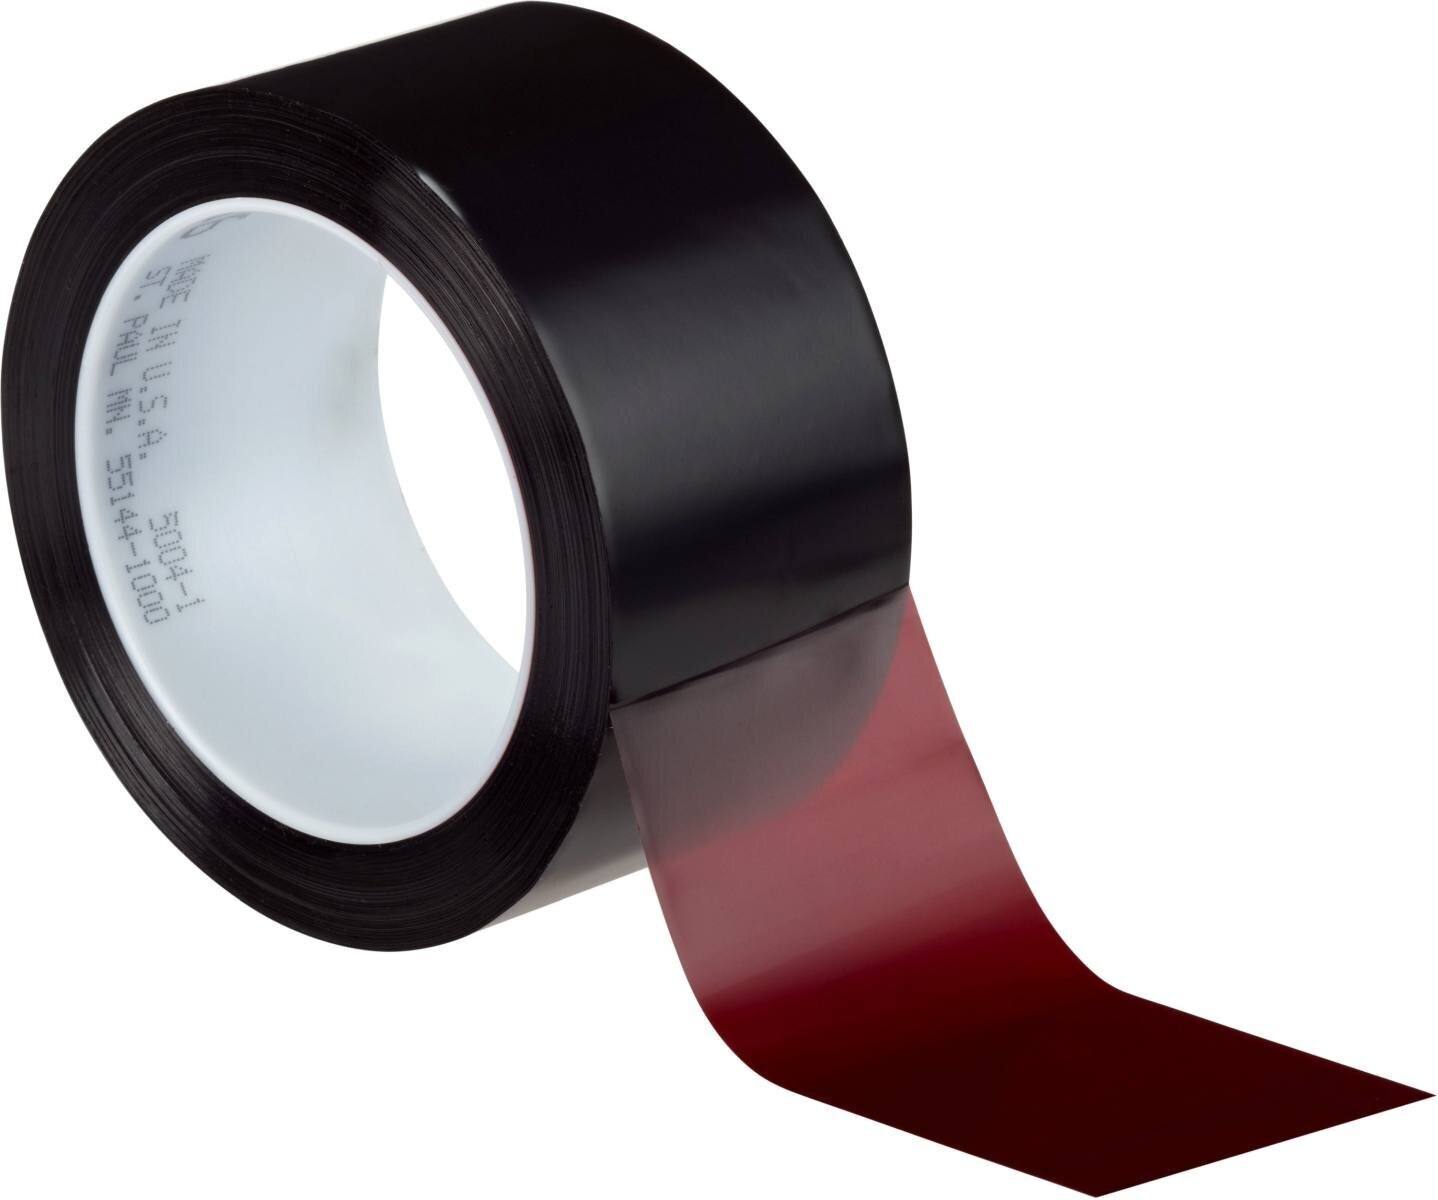 3M Lithographic adhesive tape 616 12 mm x 66 m